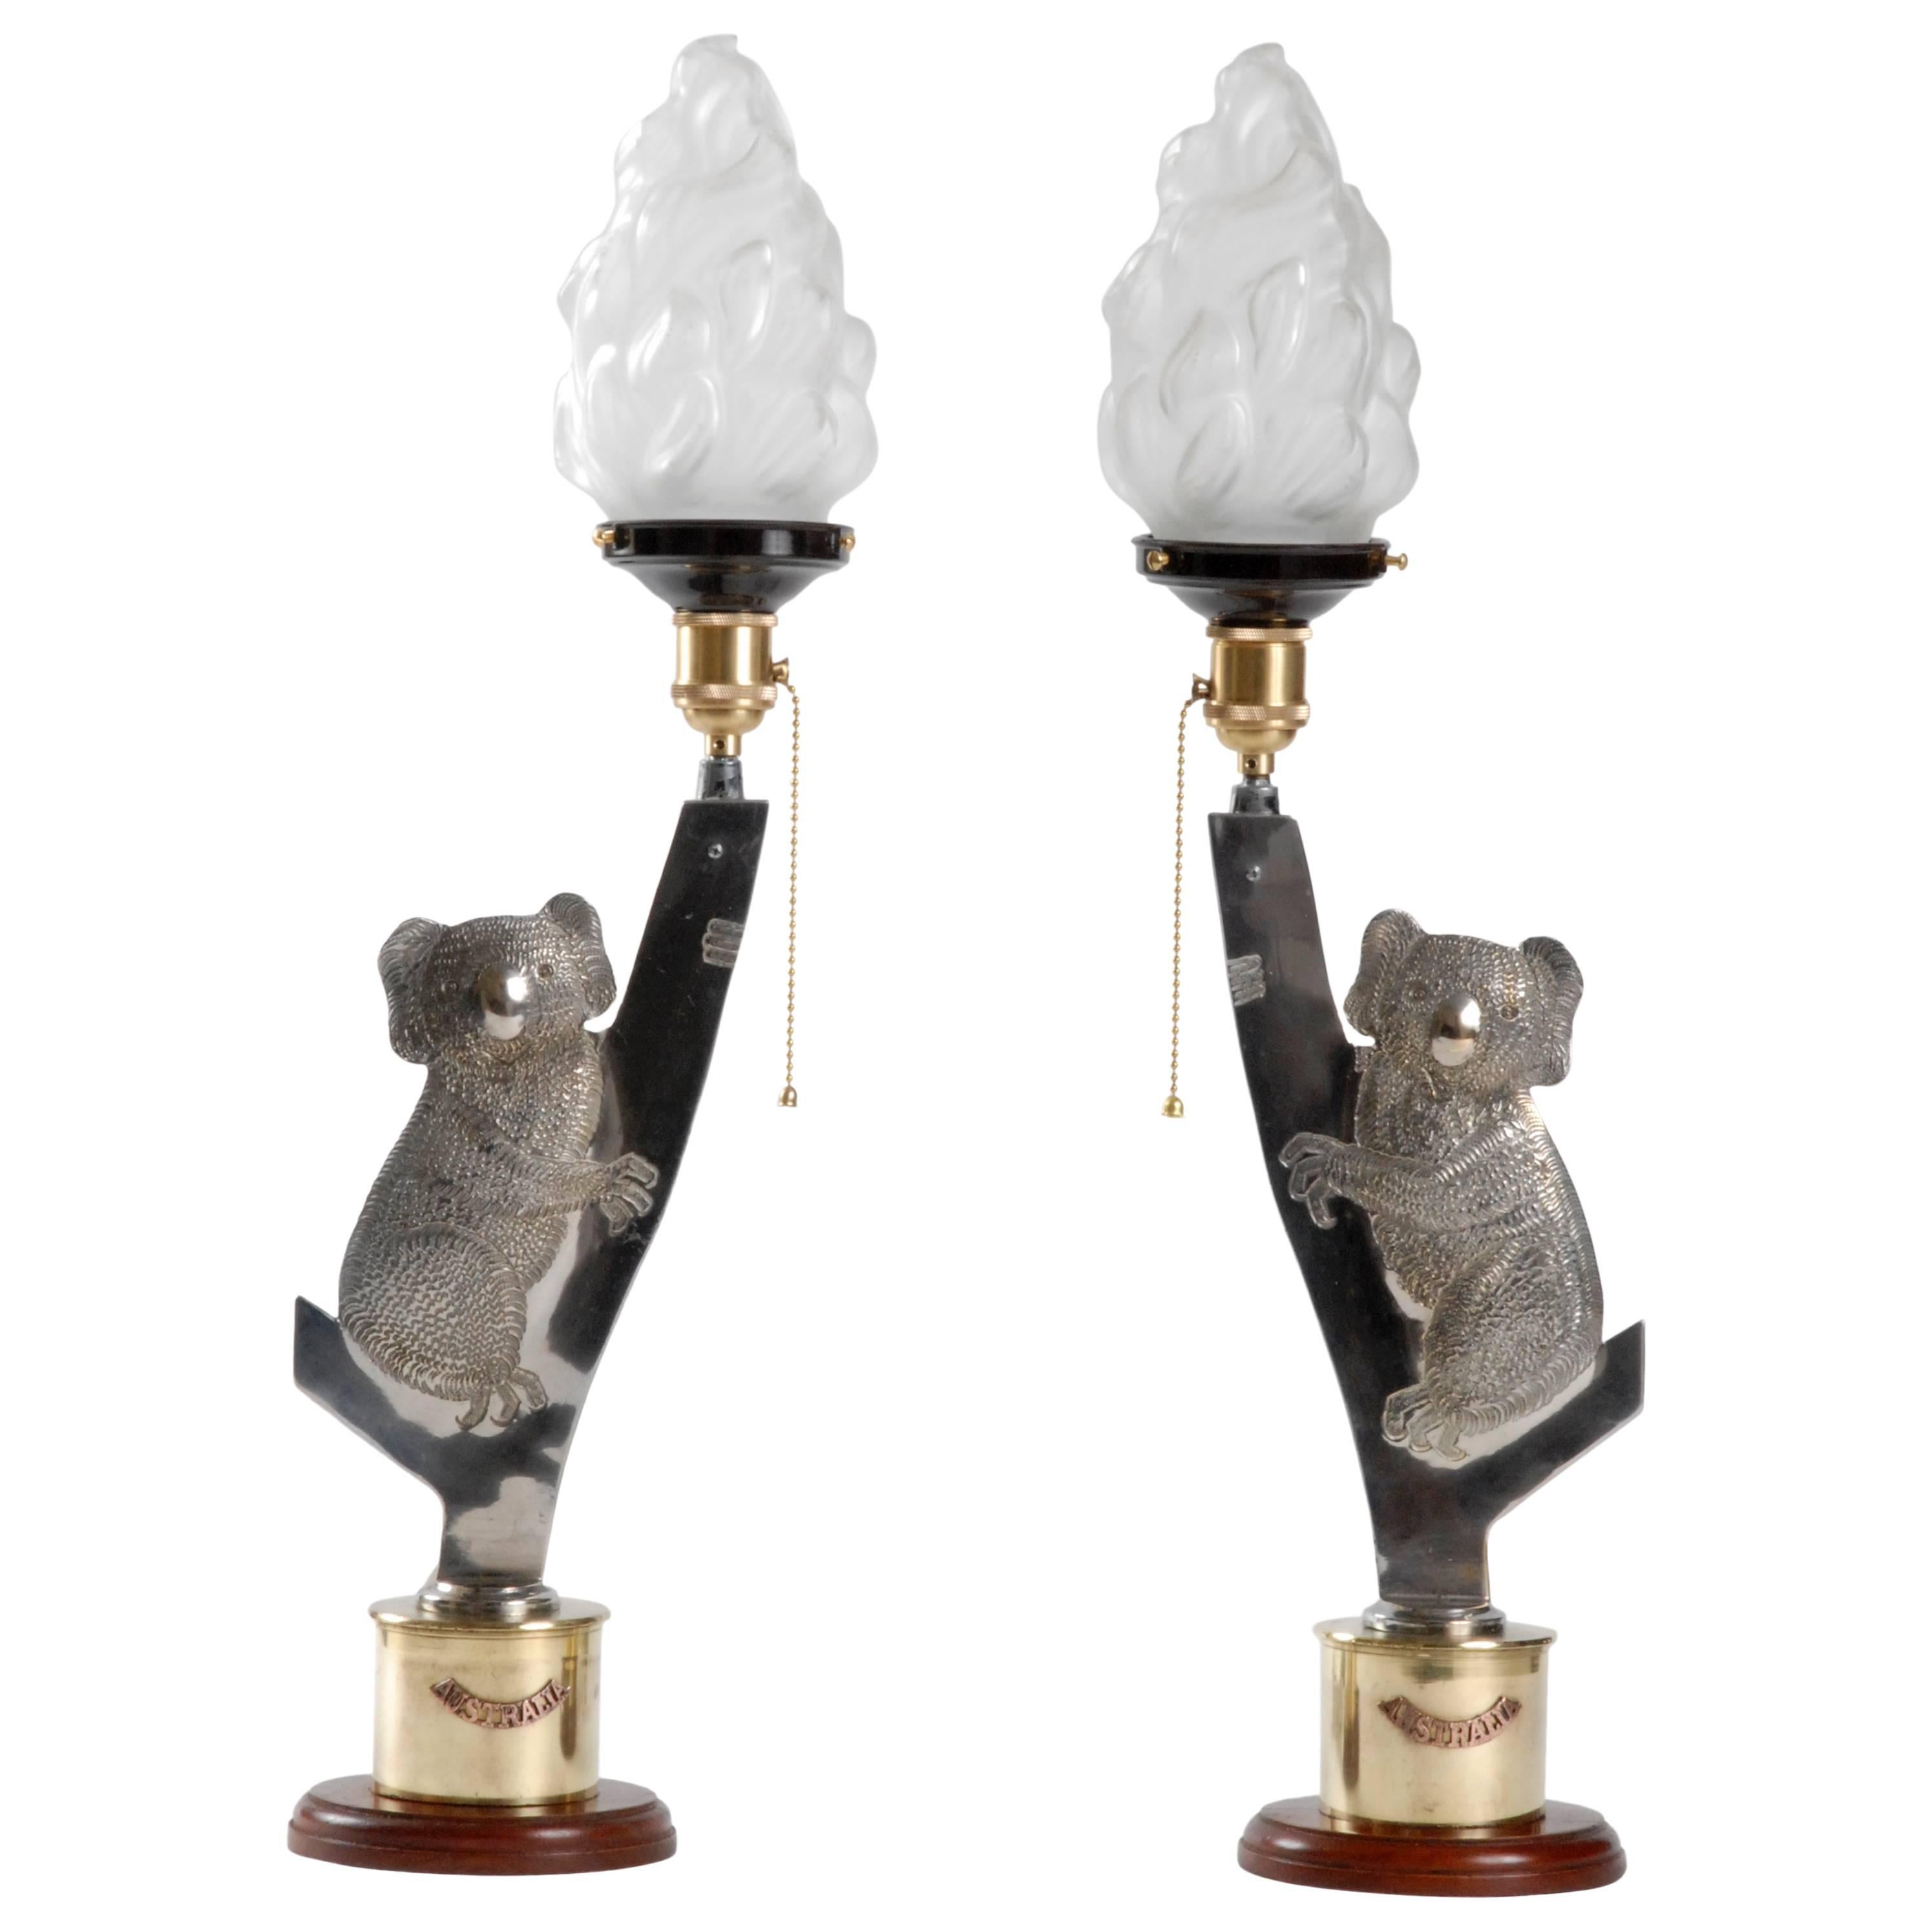 Trench-Art, Shell Casing Pair of Table Lights in the Form of Koalas, 1940